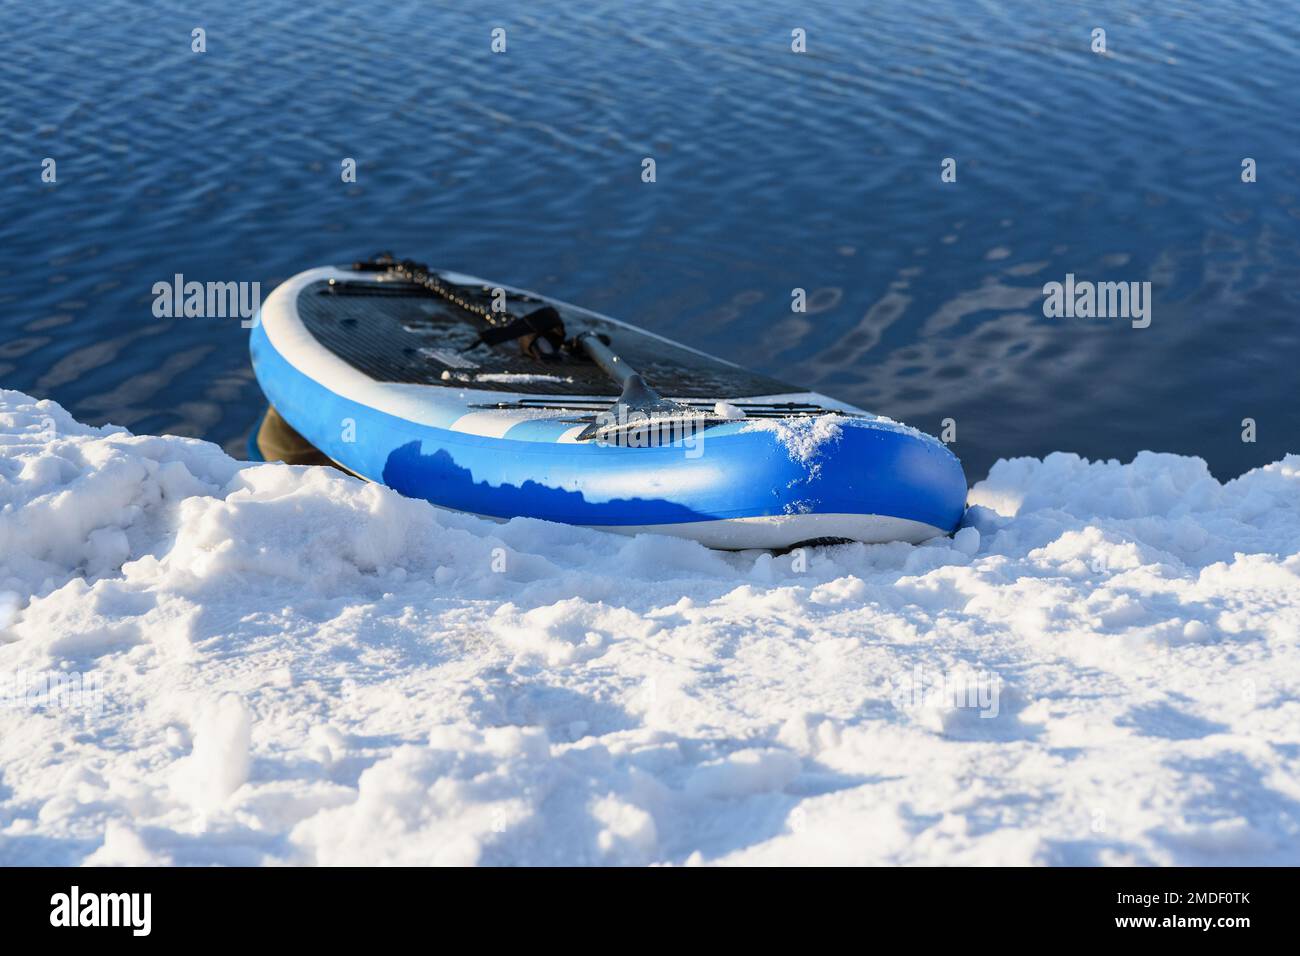 SUP board in snow and water in winter. Winter season and active leisure concept Stock Photo